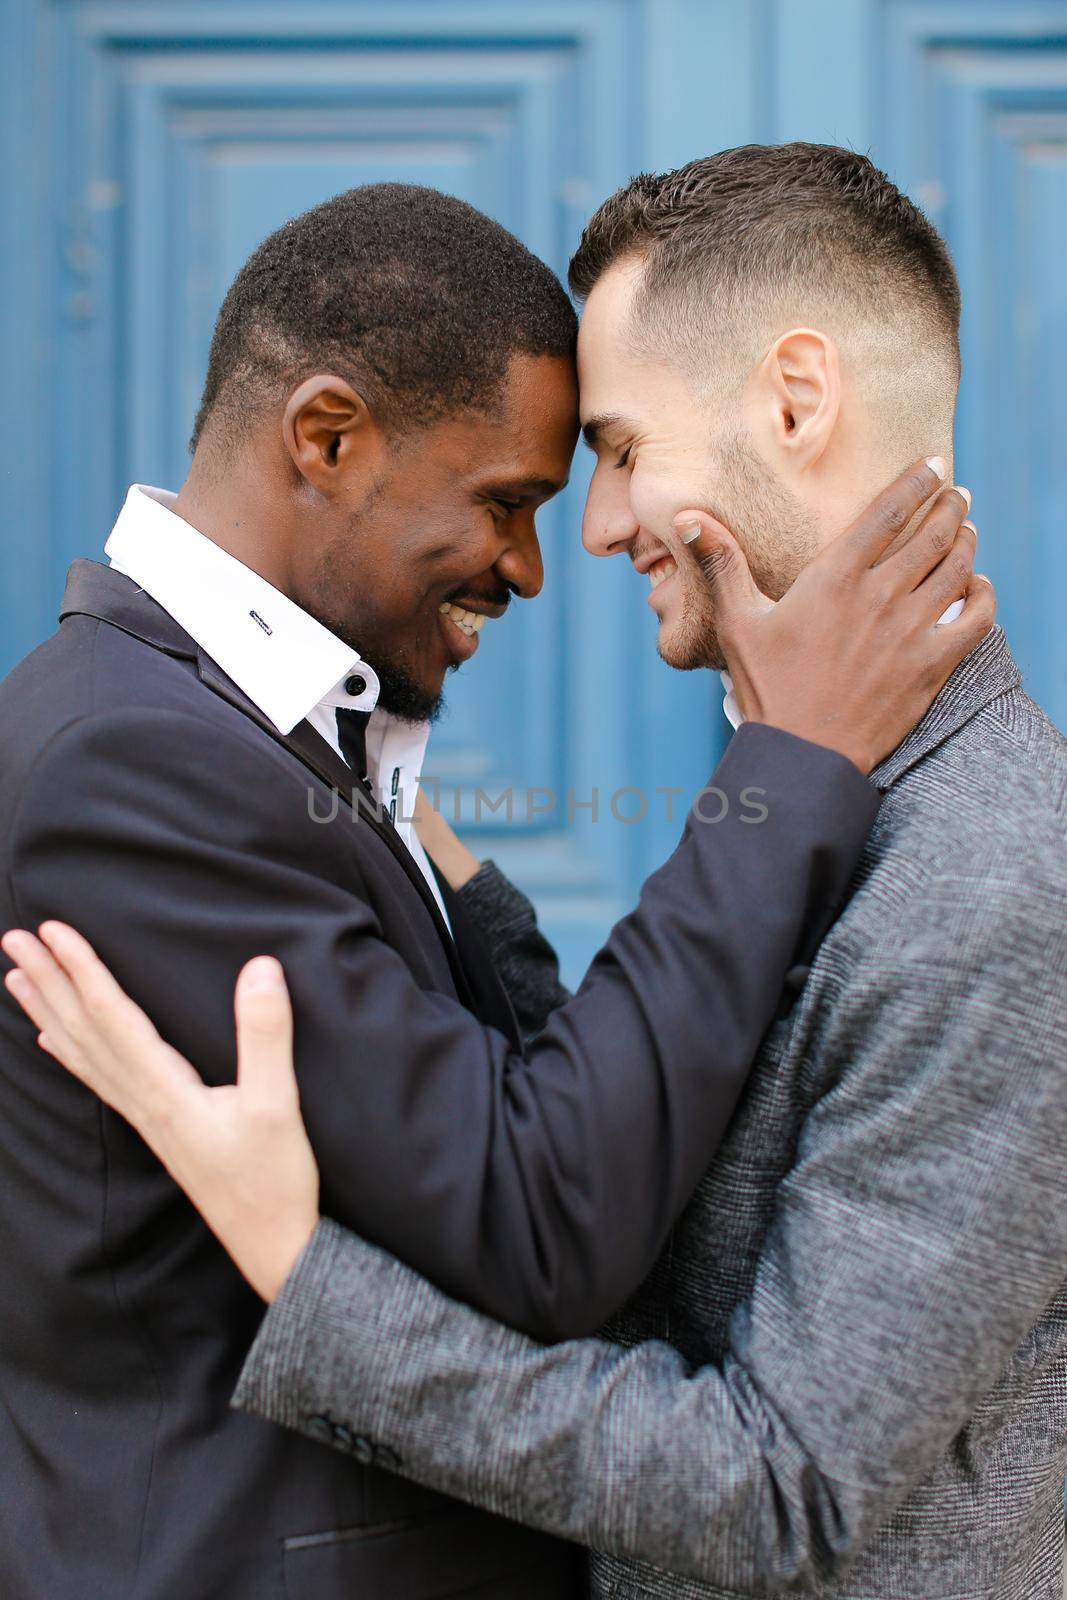 Afro american man hugging caucasian guy in door background, wearing suit. Concept of same sex couple and gays.